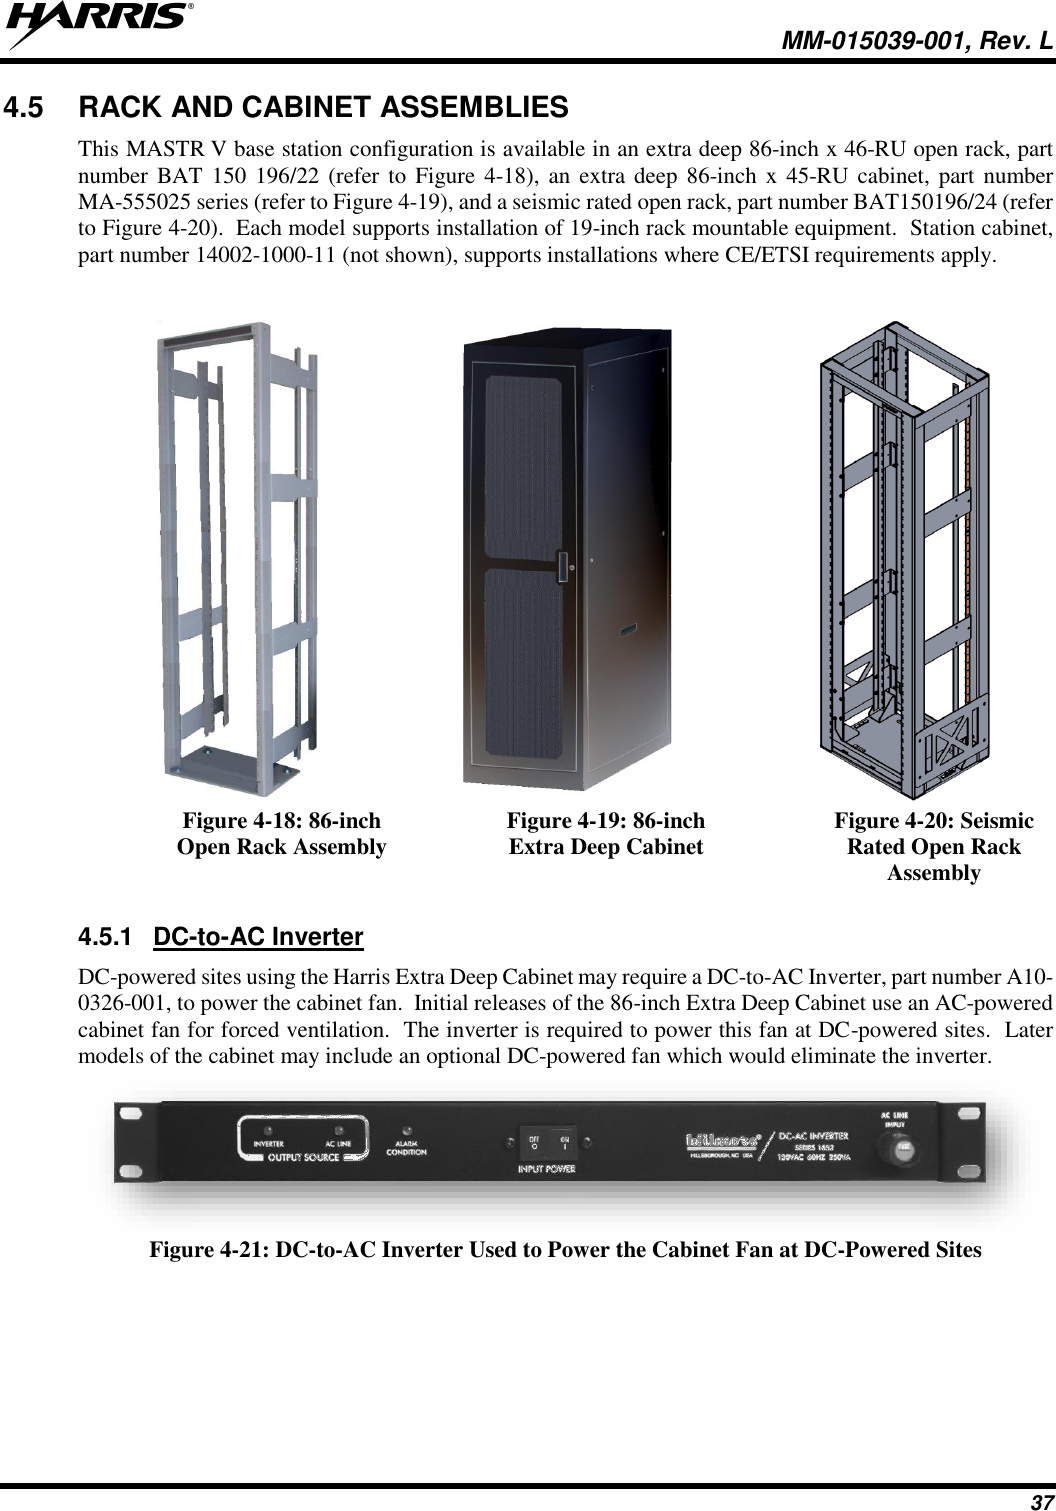   MM-015039-001, Rev. L 37 4.5  RACK AND CABINET ASSEMBLIES This MASTR V base station configuration is available in an extra deep 86-inch x 46-RU open rack, part number BAT 150 196/22 (refer to Figure 4-18), an extra deep 86-inch x 45-RU  cabinet, part number MA-555025 series (refer to Figure 4-19), and a seismic rated open rack, part number BAT150196/24 (refer to Figure 4-20).  Each model supports installation of 19-inch rack mountable equipment.  Station cabinet, part number 14002-1000-11 (not shown), supports installations where CE/ETSI requirements apply.     Figure 4-18: 86-inch Open Rack Assembly Figure 4-19: 86-inch Extra Deep Cabinet Figure 4-20: Seismic Rated Open Rack Assembly  4.5.1  DC-to-AC Inverter DC-powered sites using the Harris Extra Deep Cabinet may require a DC-to-AC Inverter, part number A10-0326-001, to power the cabinet fan.  Initial releases of the 86-inch Extra Deep Cabinet use an AC-powered cabinet fan for forced ventilation.  The inverter is required to power this fan at DC-powered sites.  Later models of the cabinet may include an optional DC-powered fan which would eliminate the inverter.  Figure 4-21: DC-to-AC Inverter Used to Power the Cabinet Fan at DC-Powered Sites 